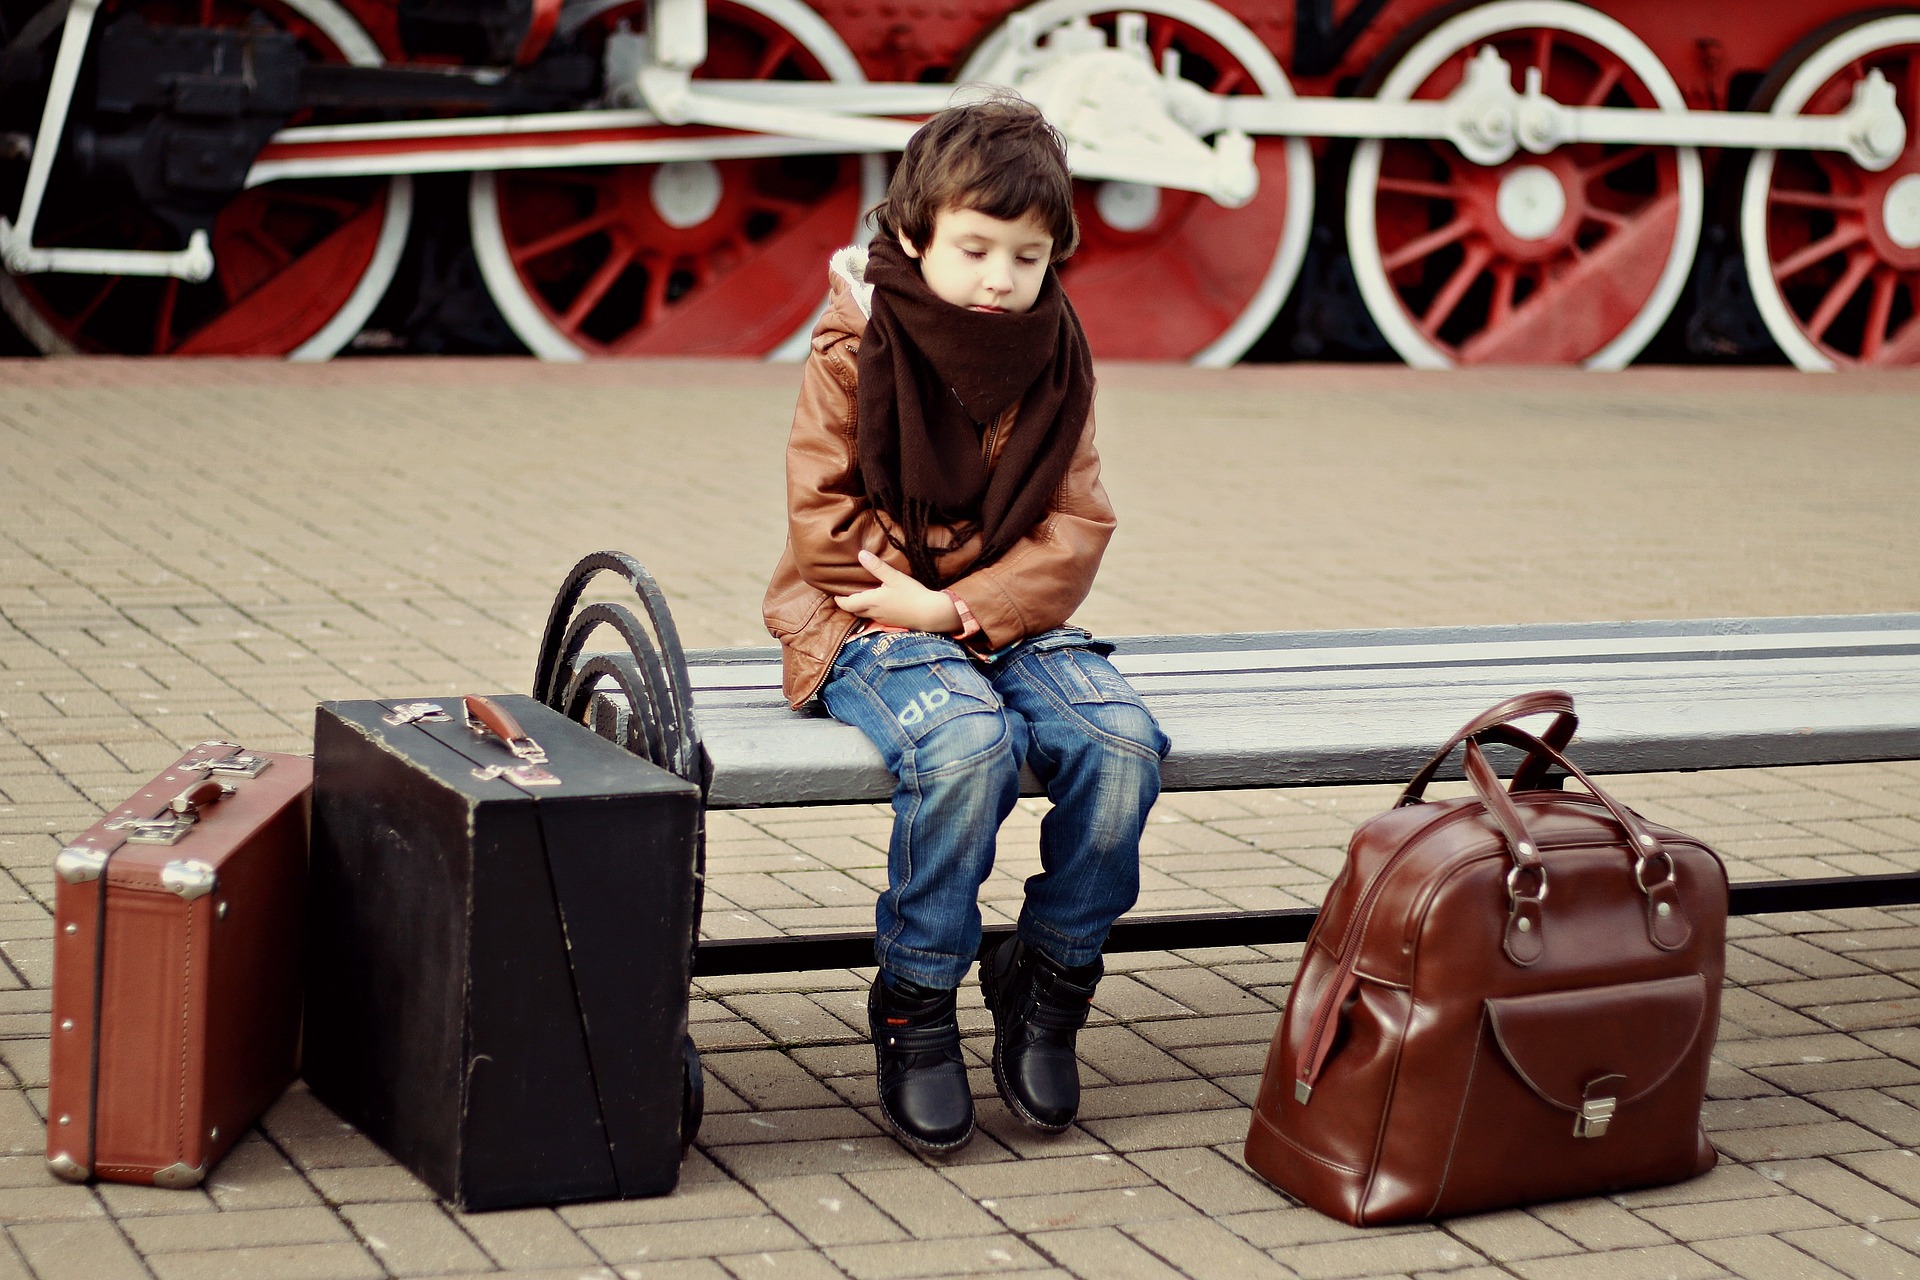 young child on train station bench near suitcases